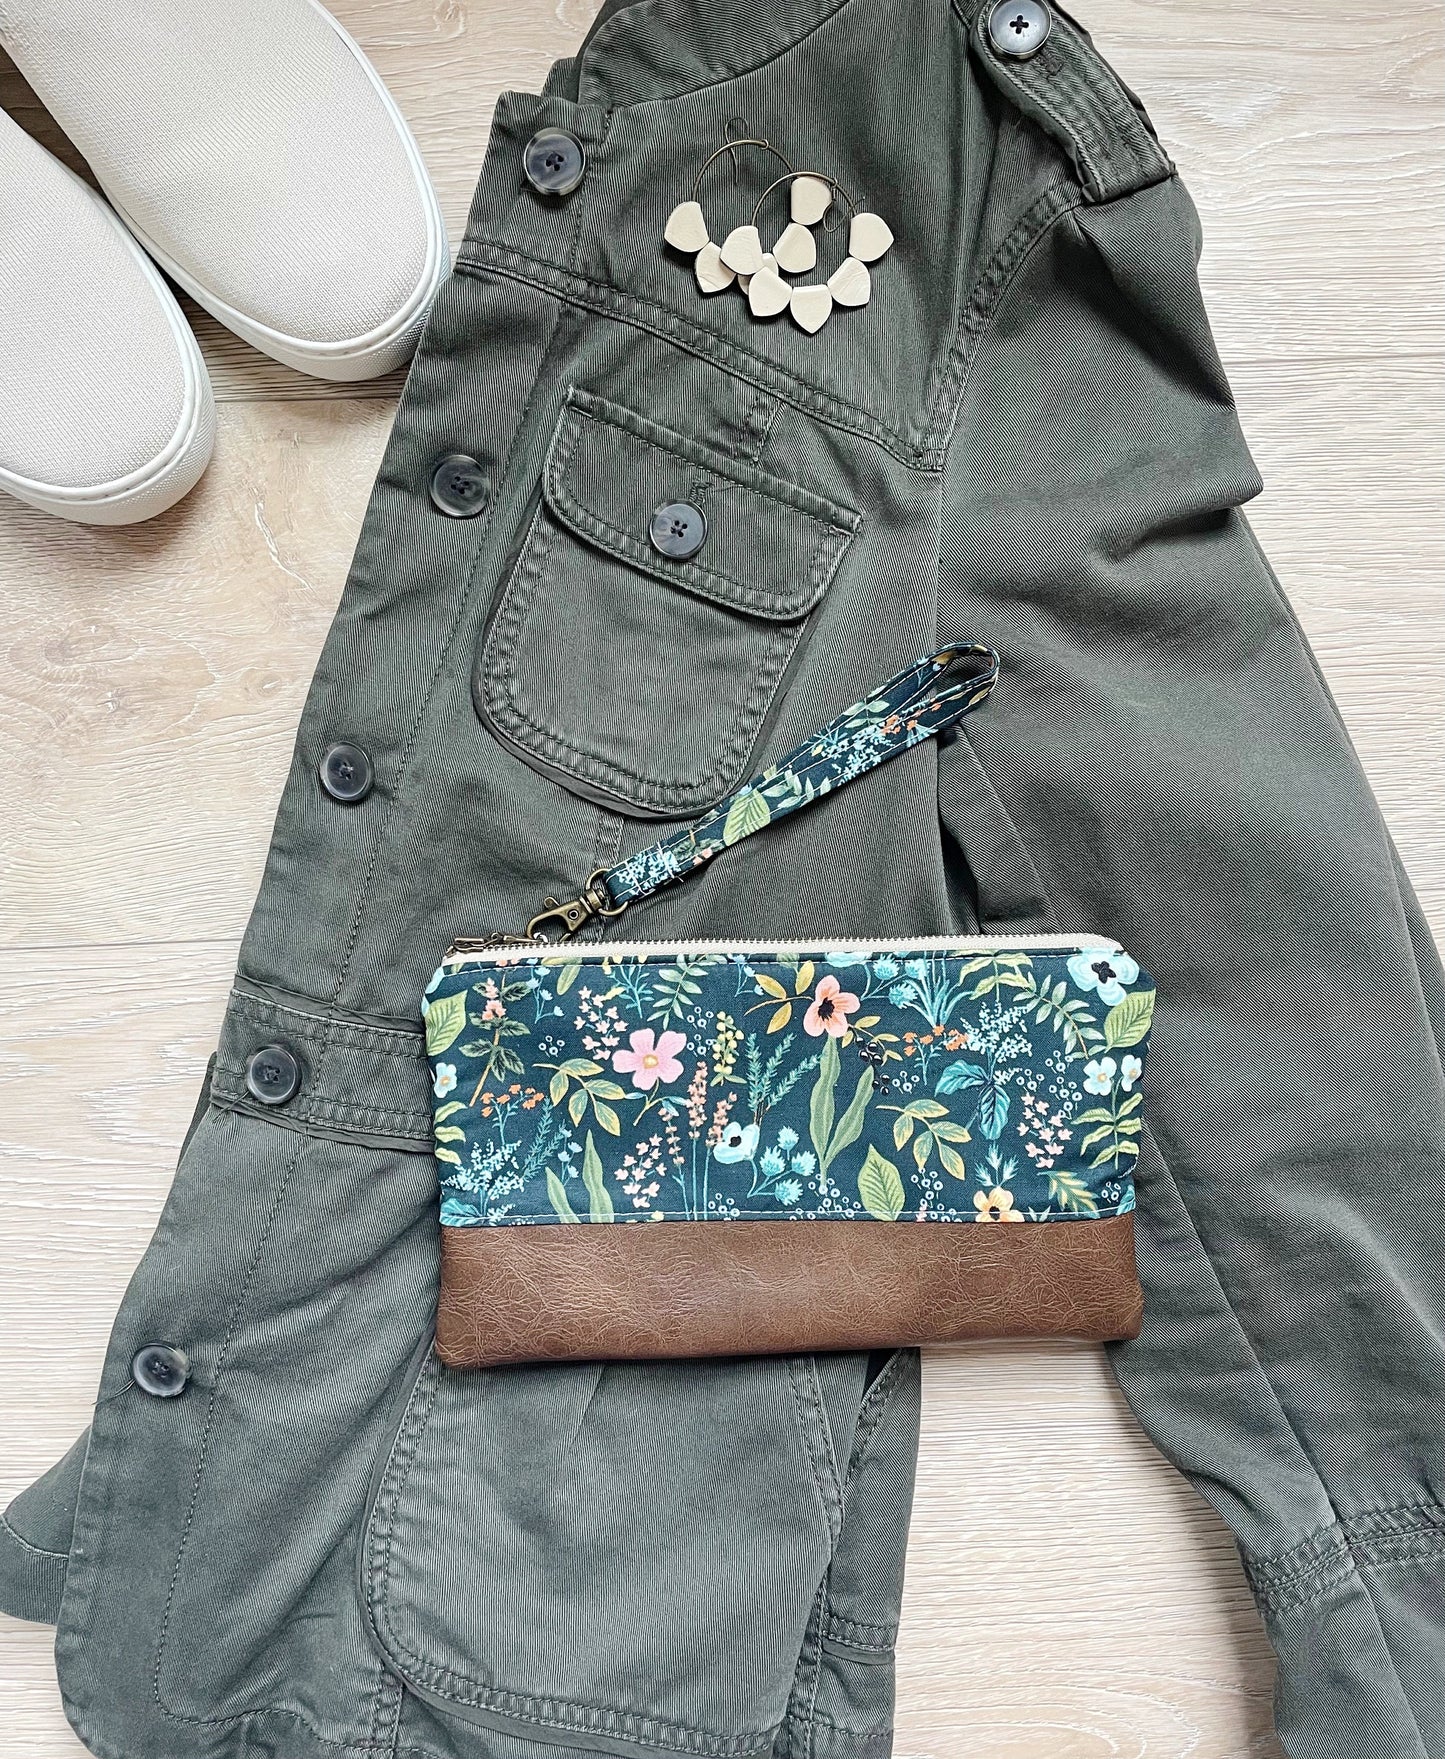 Blue floral wristlet with pink flowers and brown vinyl along the bottom. wristlet has matching wrist strap and antique brass zipper, styled with green coat